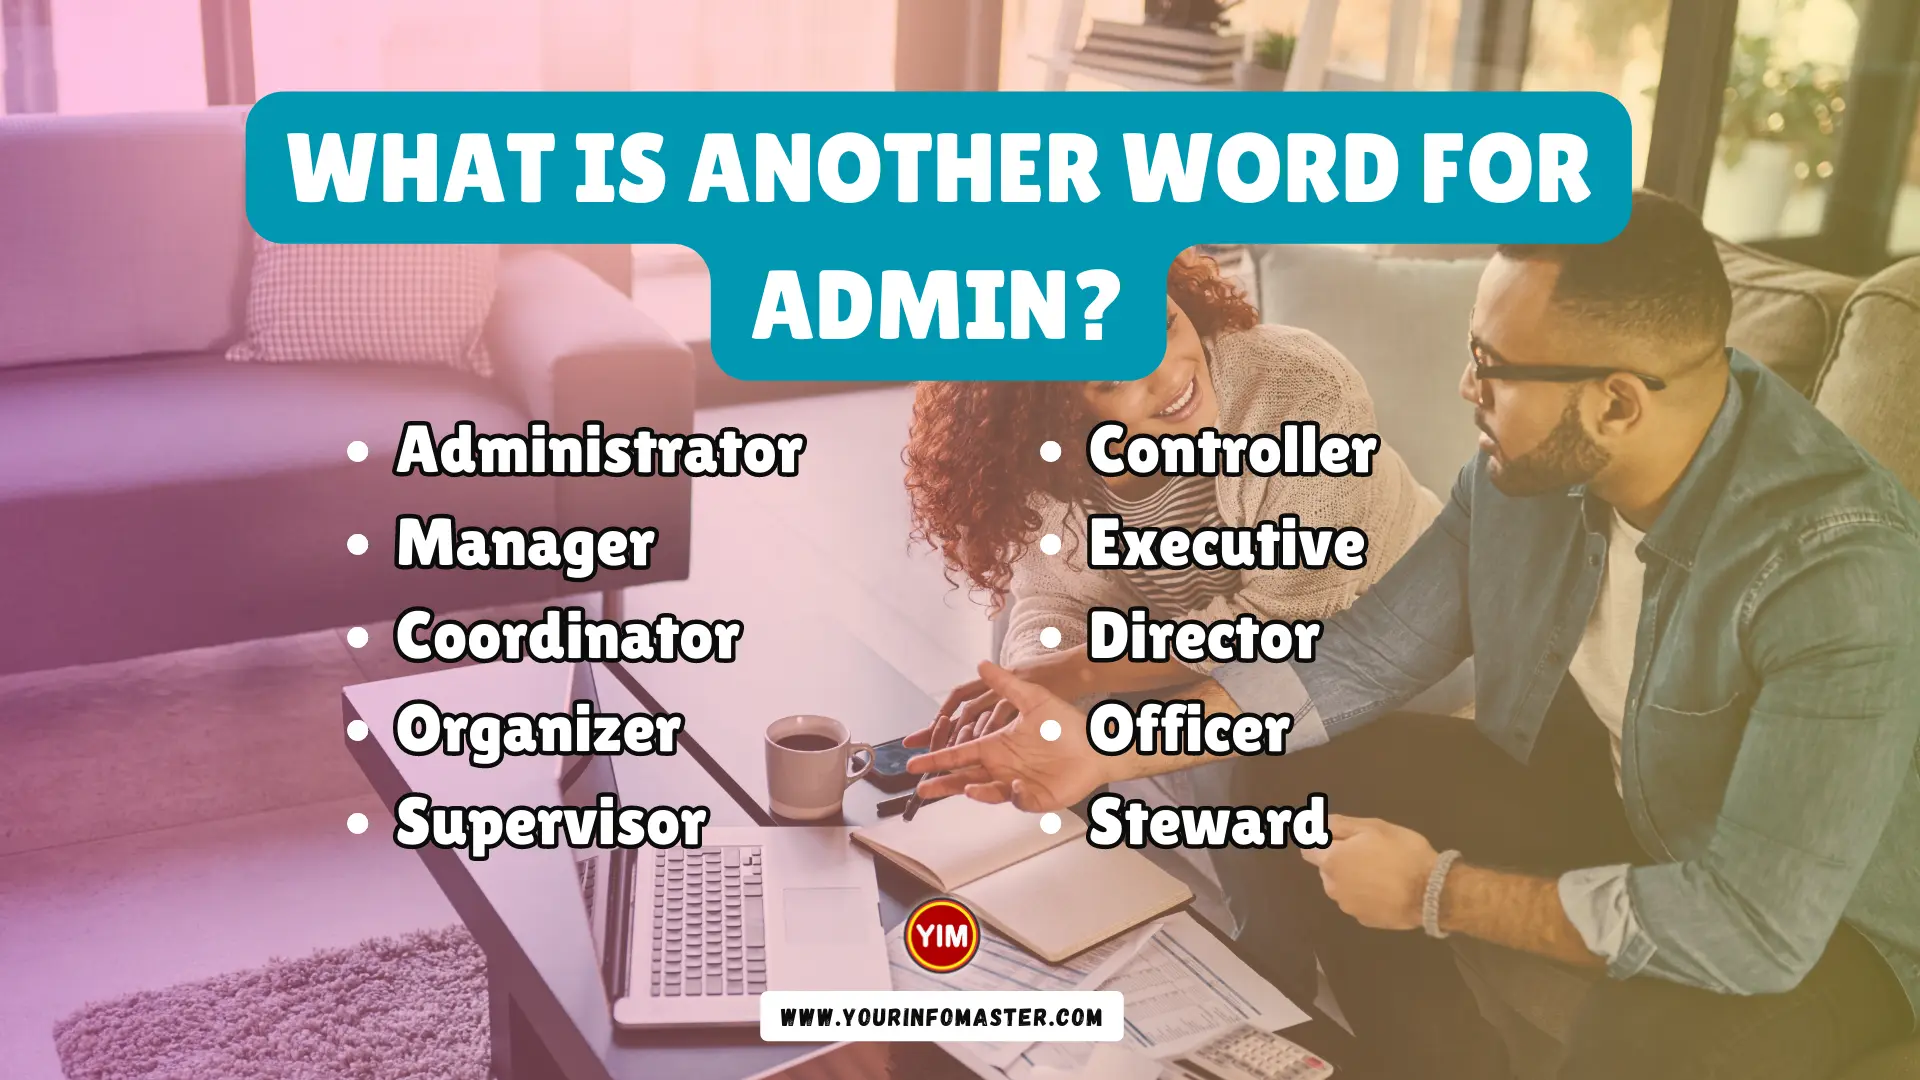 What is another word for Admin